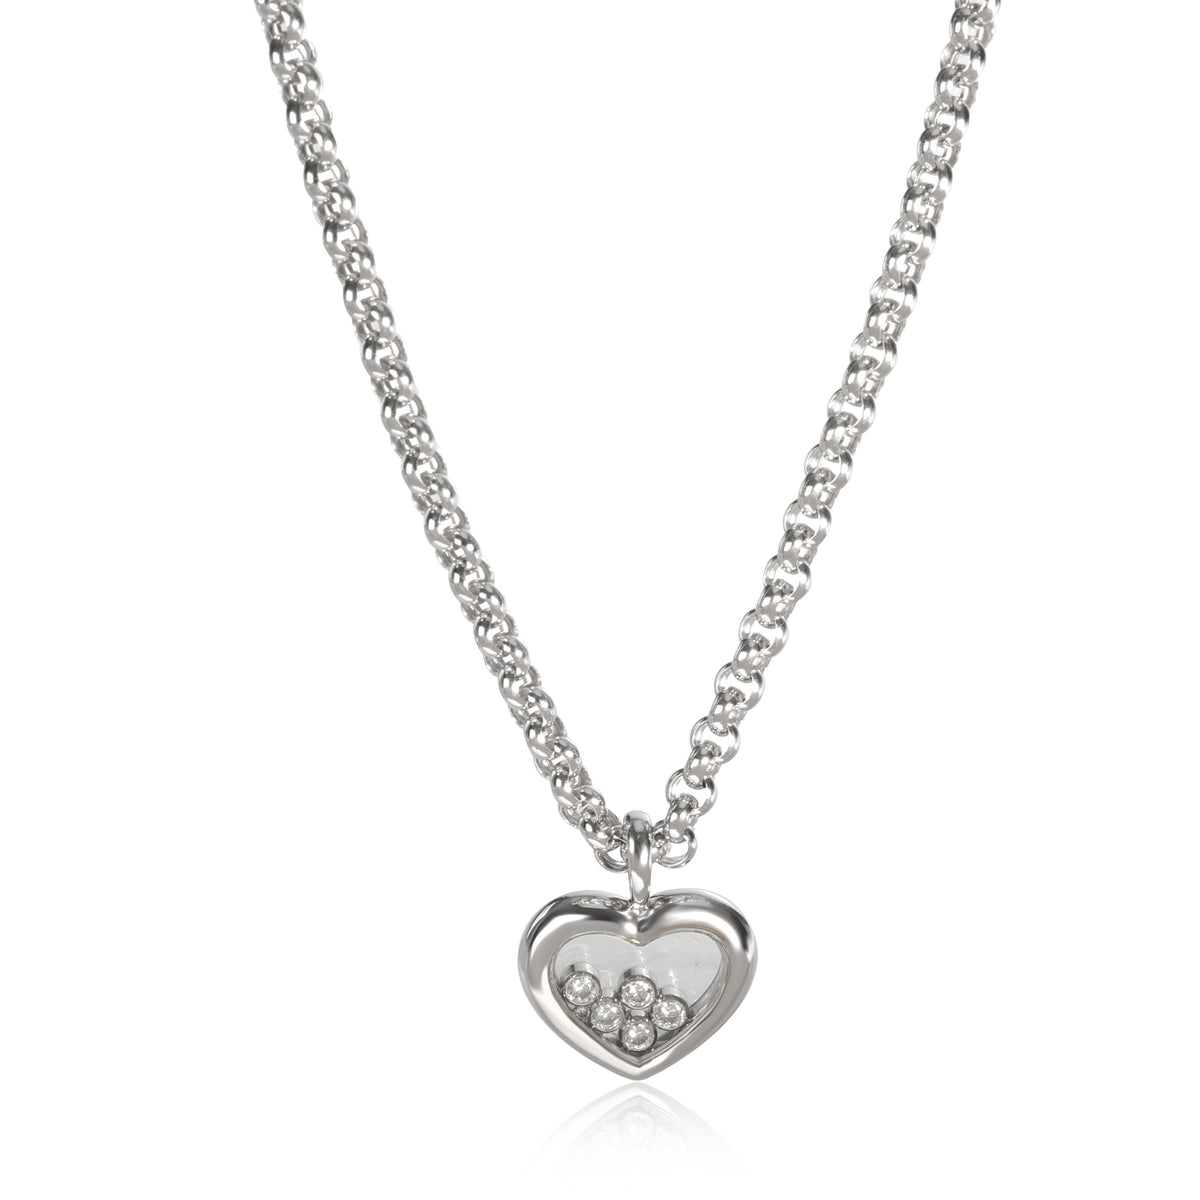 Chopard Happy Diamonds Necklace in 18K White Gold 0.25 CTW